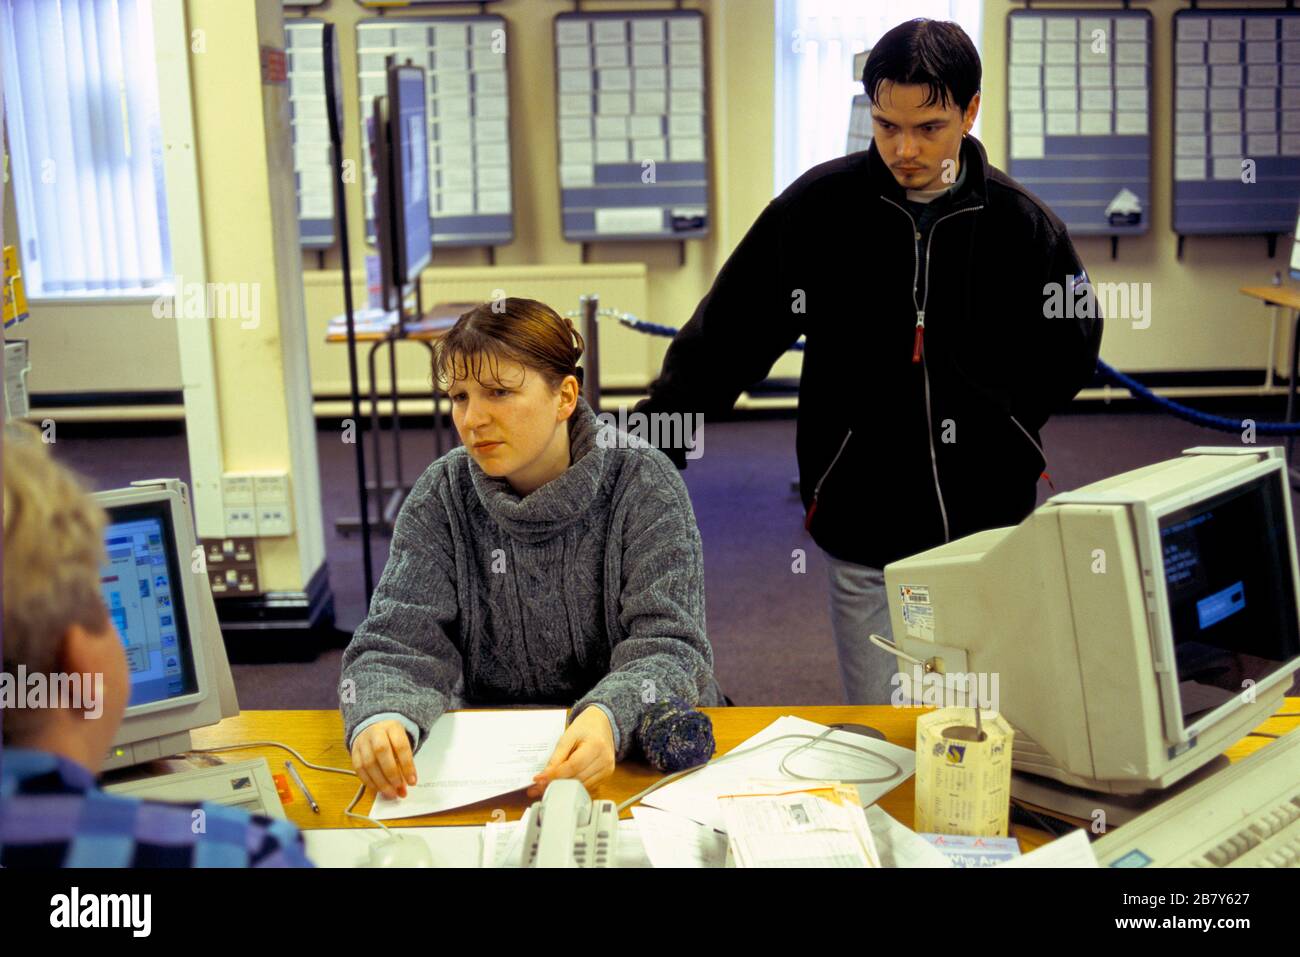 Job Centre young woman out of work looking for a work being interviewed. 1998 1990s  Mountain Ash Wales UK Stock Photo